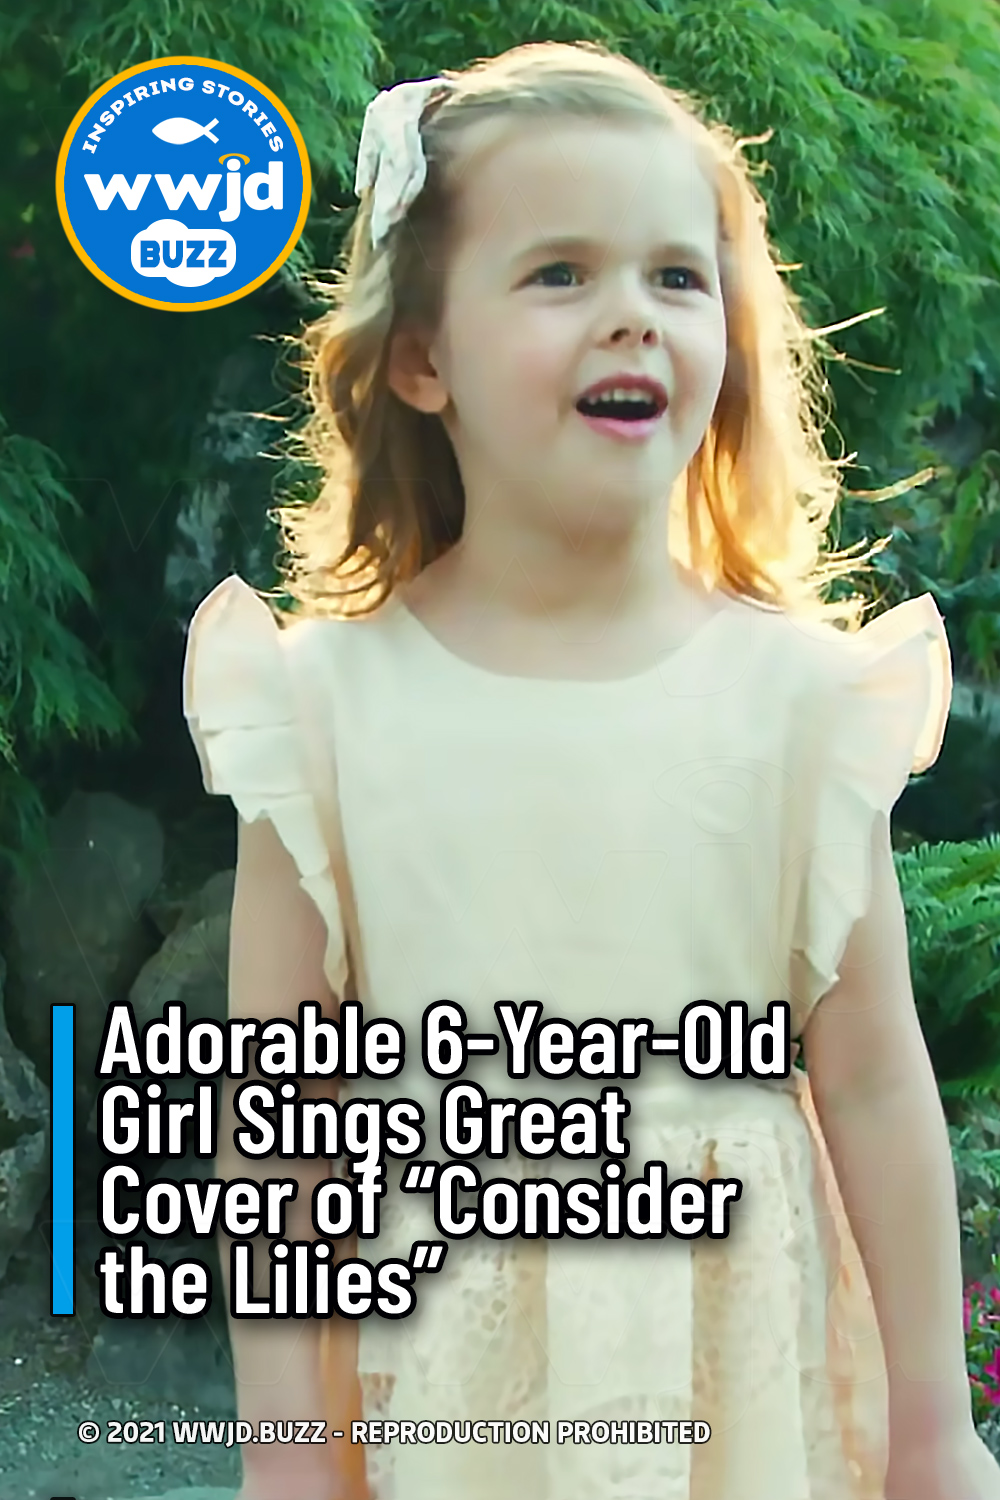 Adorable 6-Year-Old Girl Sings Great Cover of “Consider the Lilies”